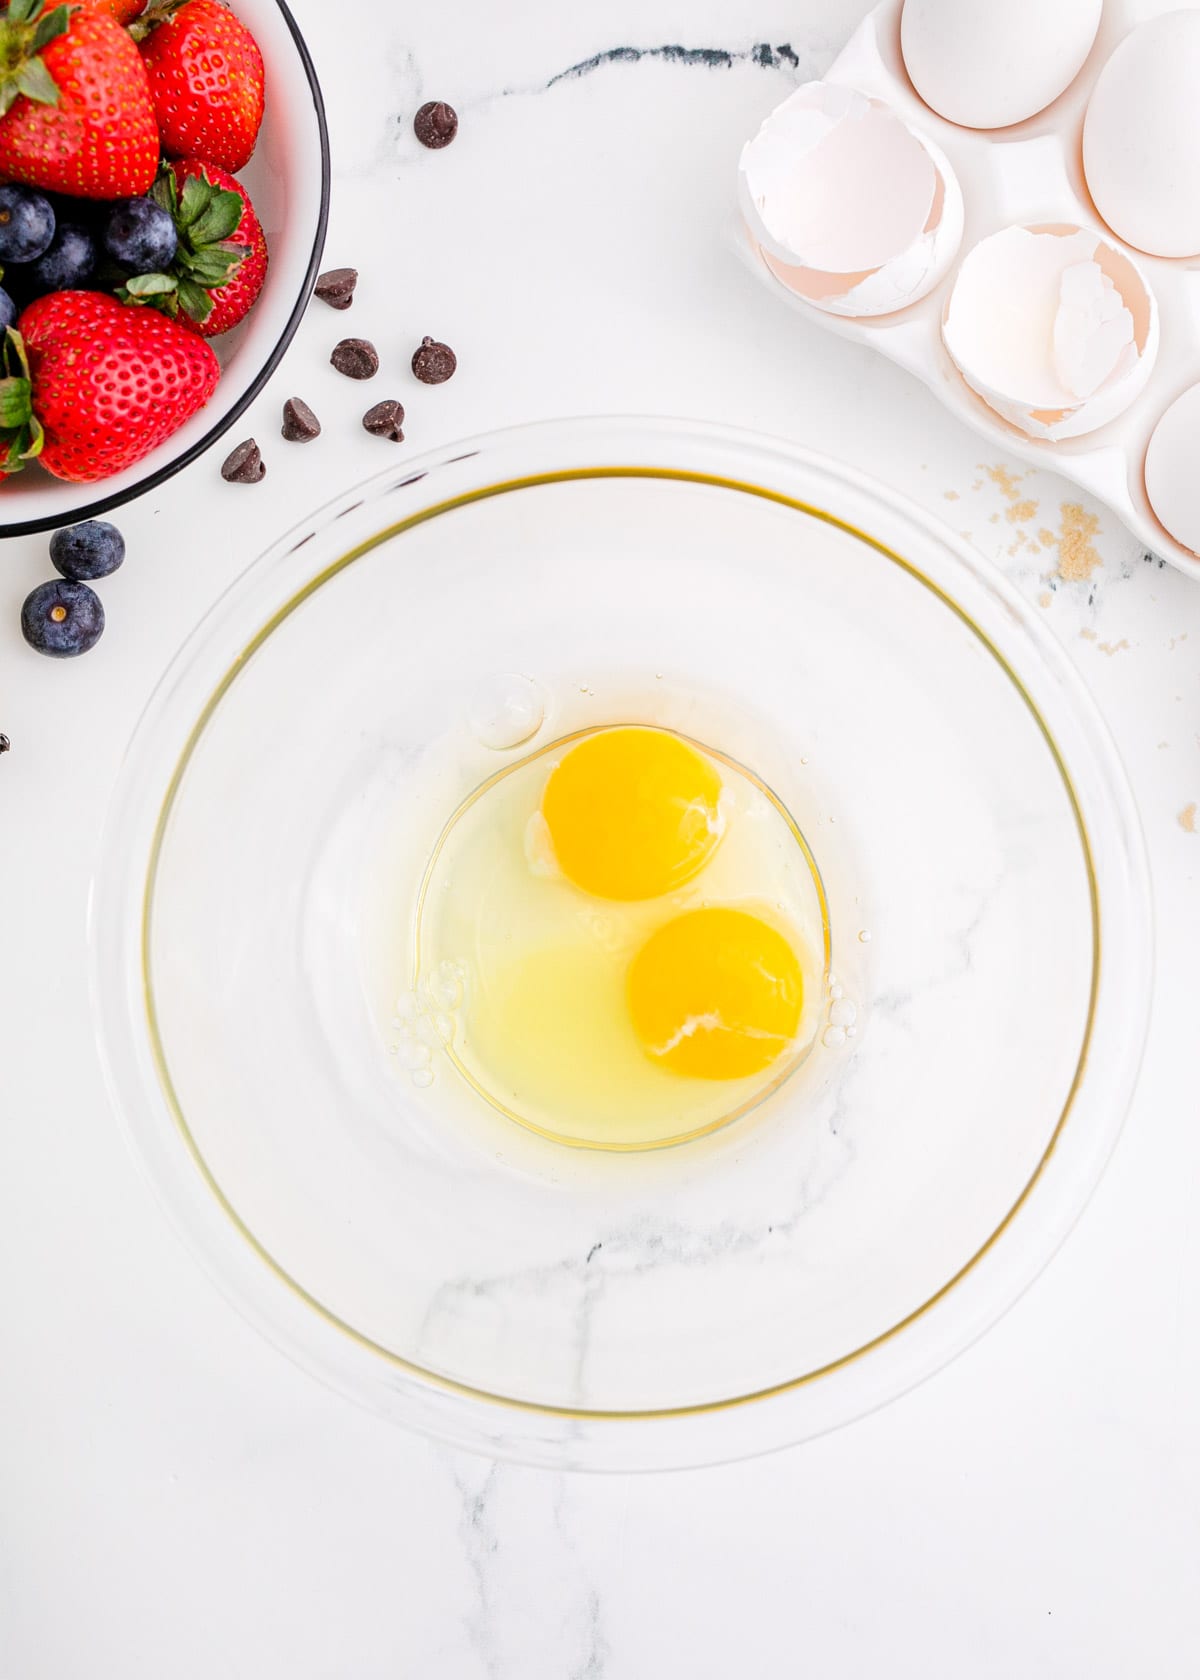 eggs in a clear bowl next to broken egg shells